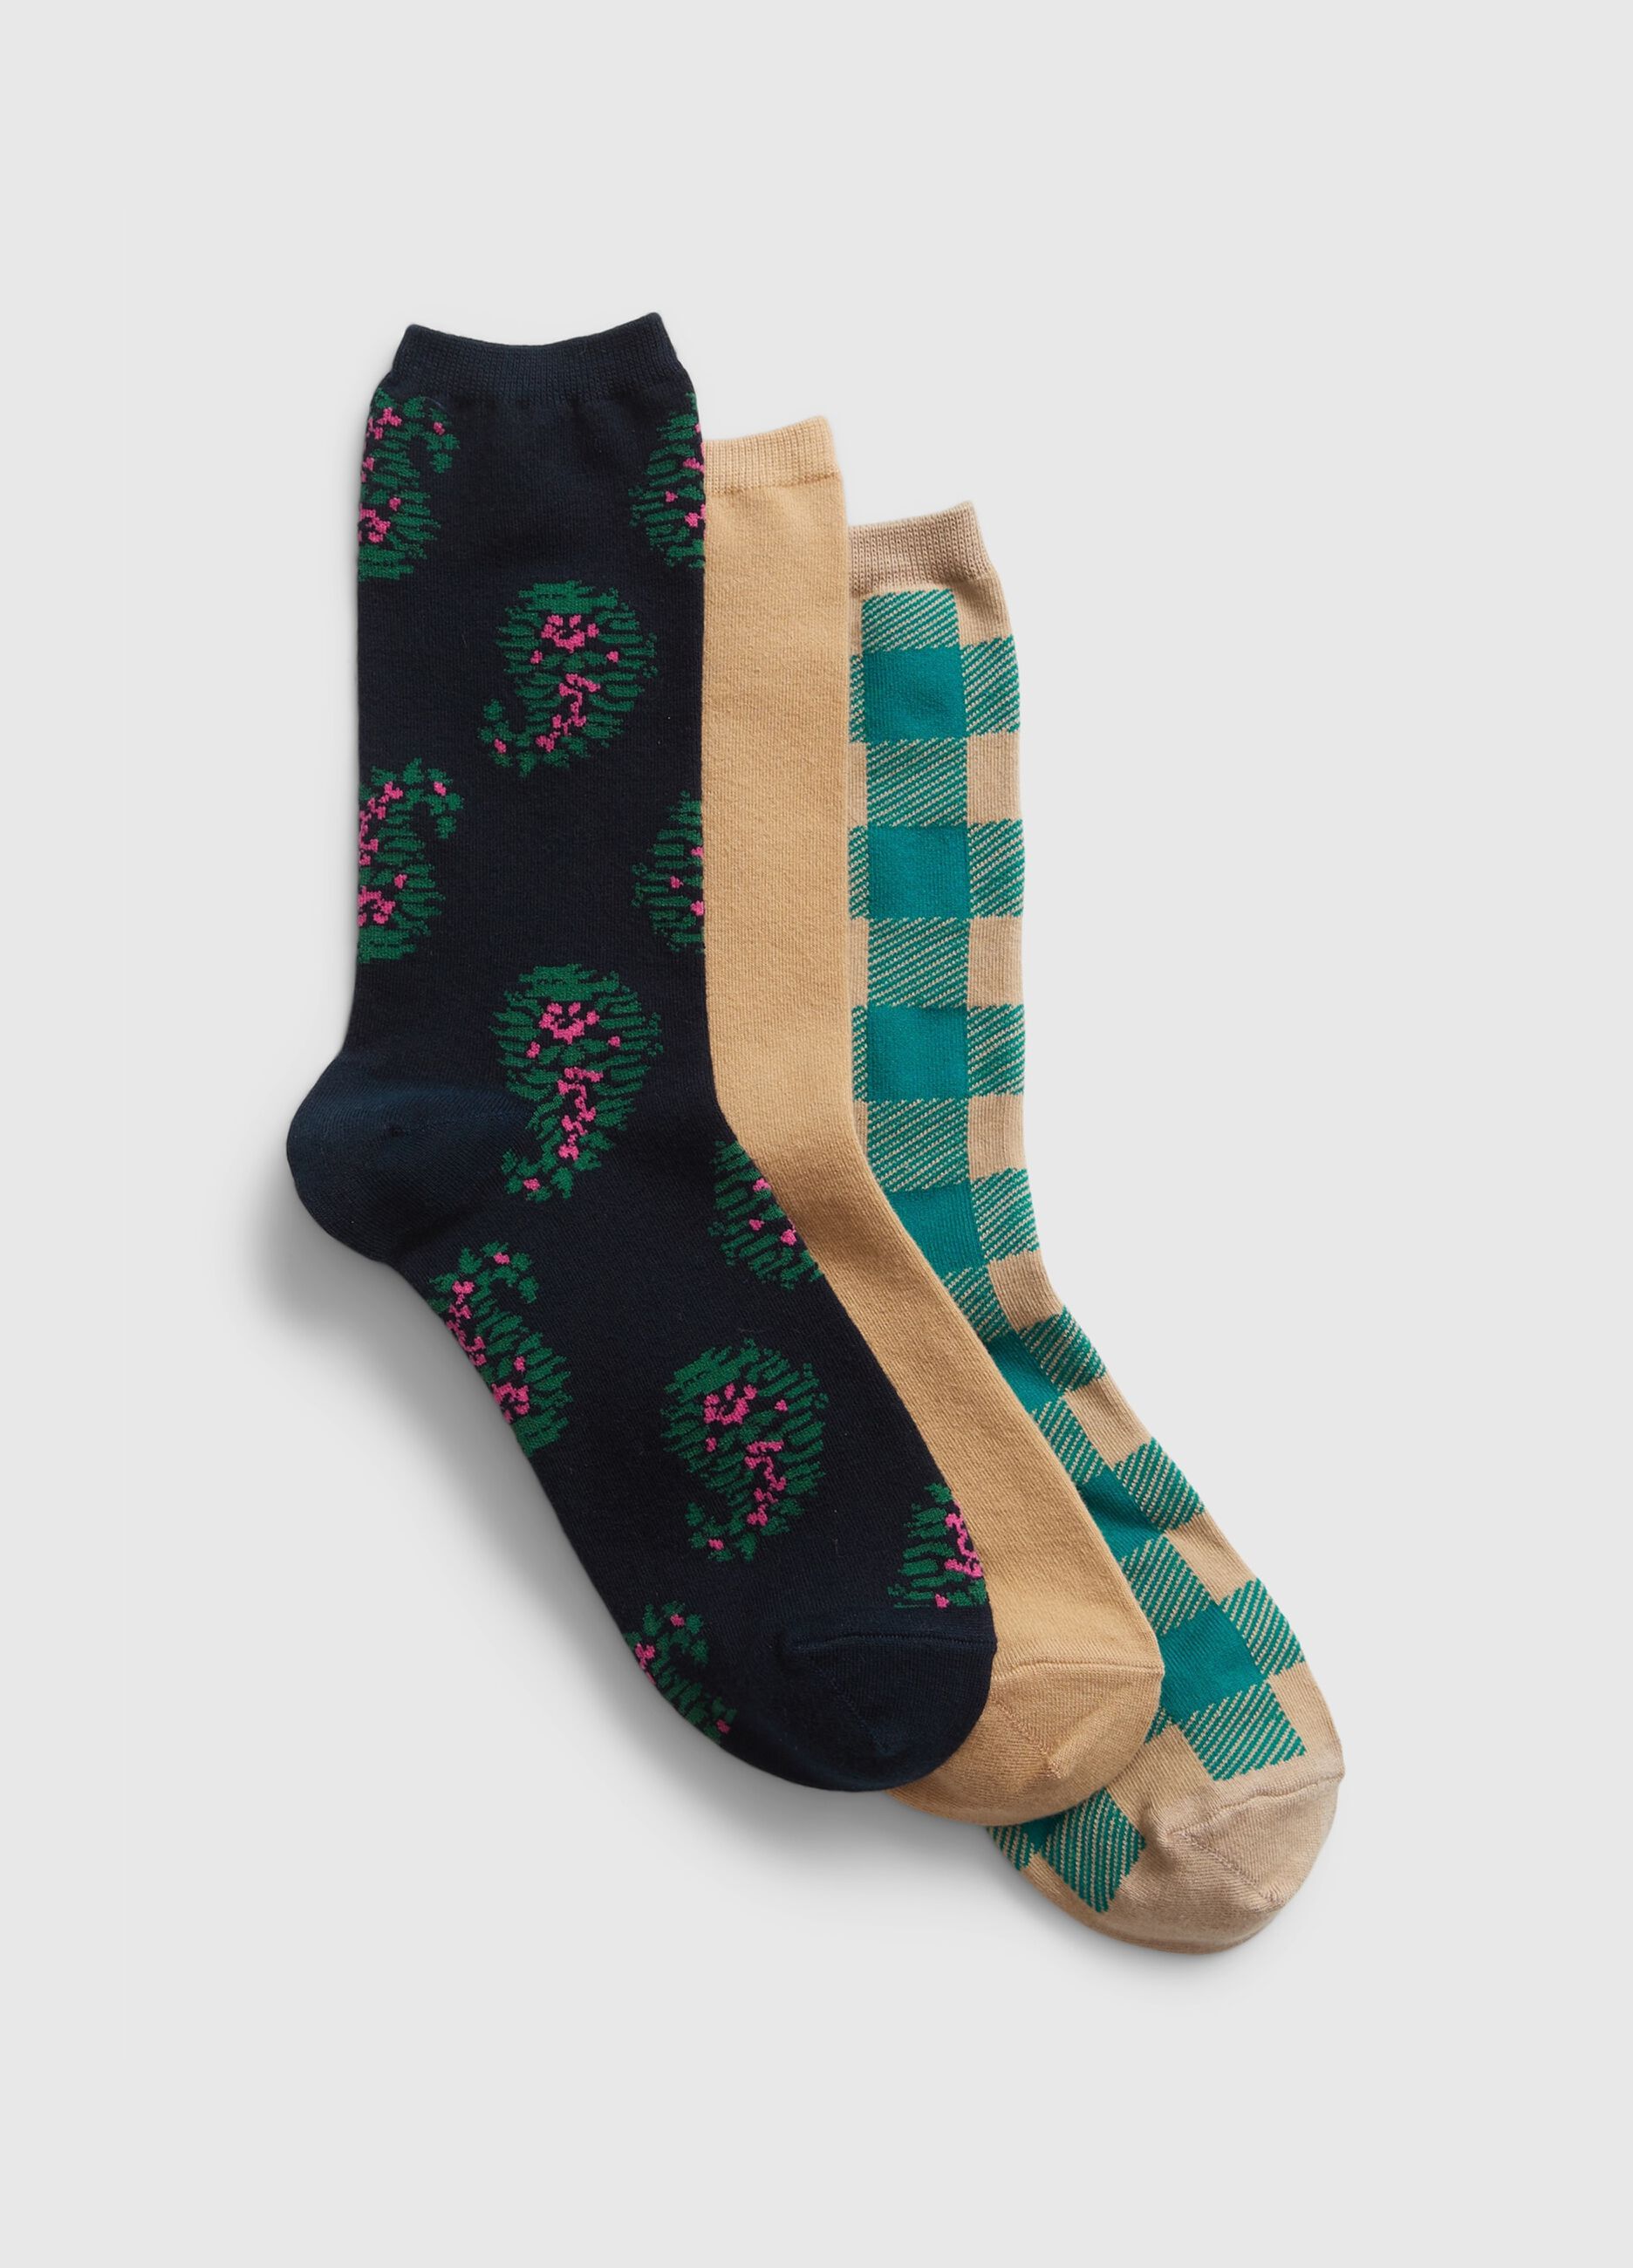 Three-pair pack socks with paisley pattern